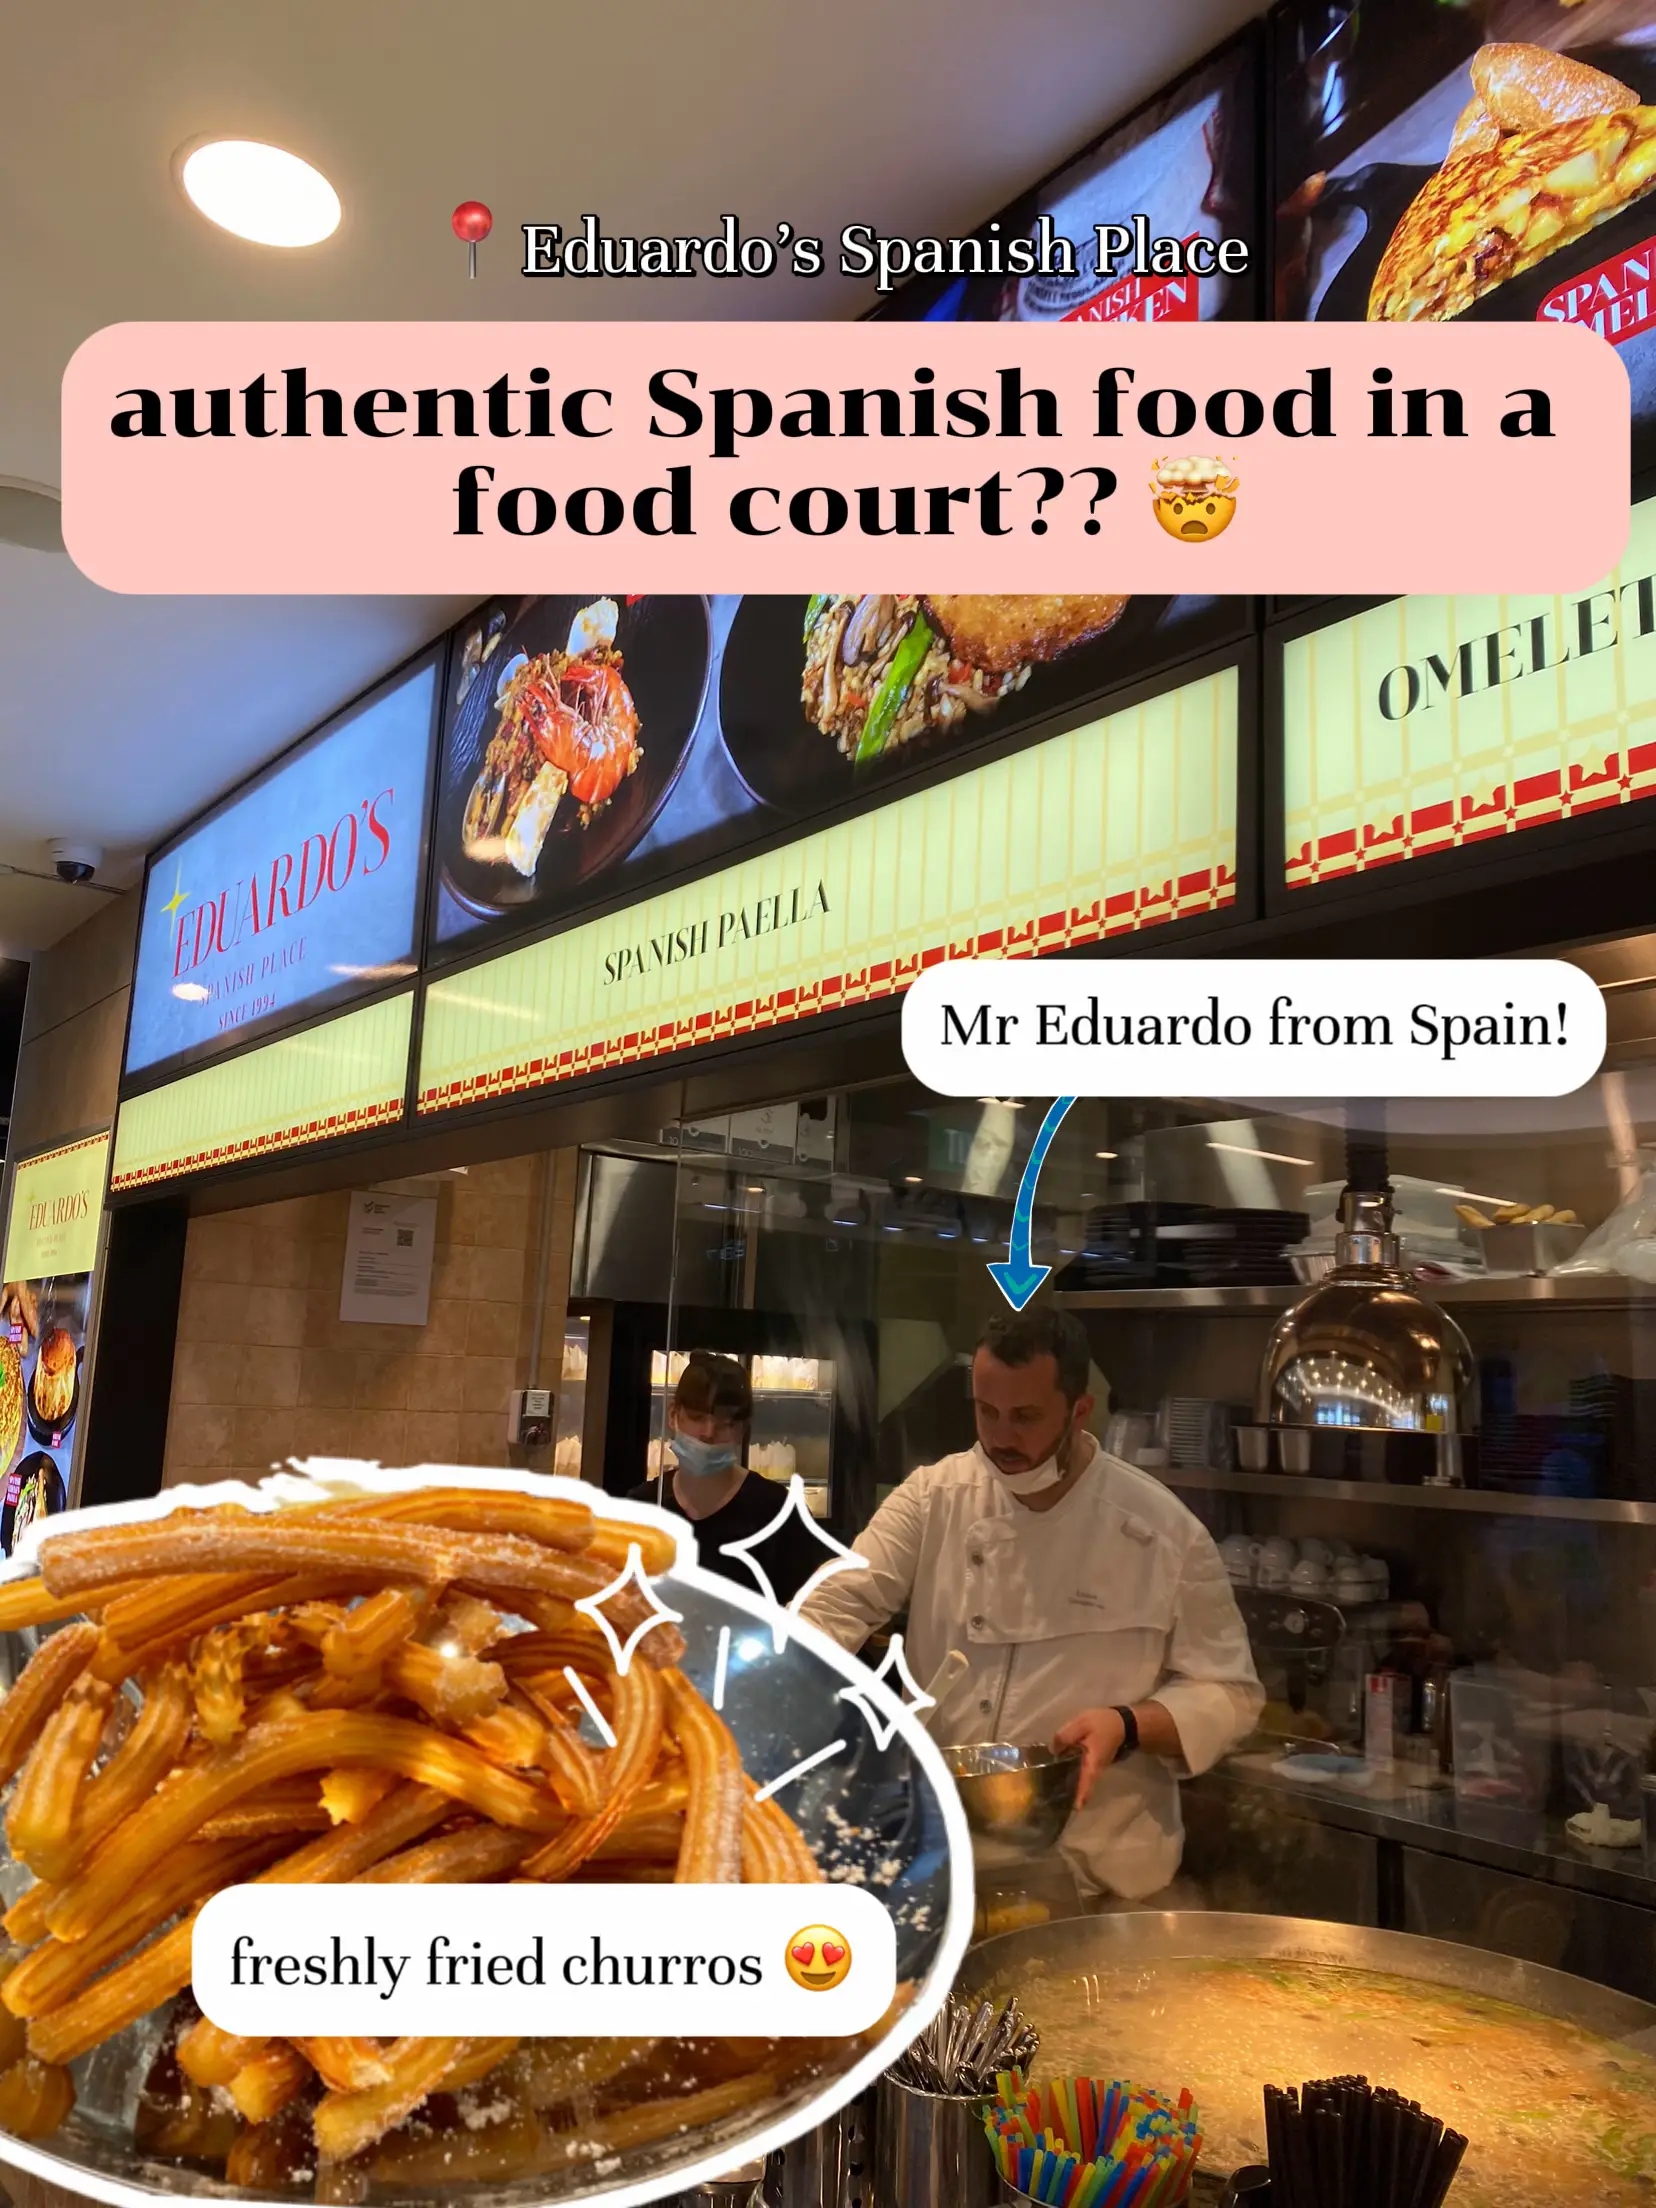 easties rise up 🙏🏻 authentic spanish food 😋's images(0)